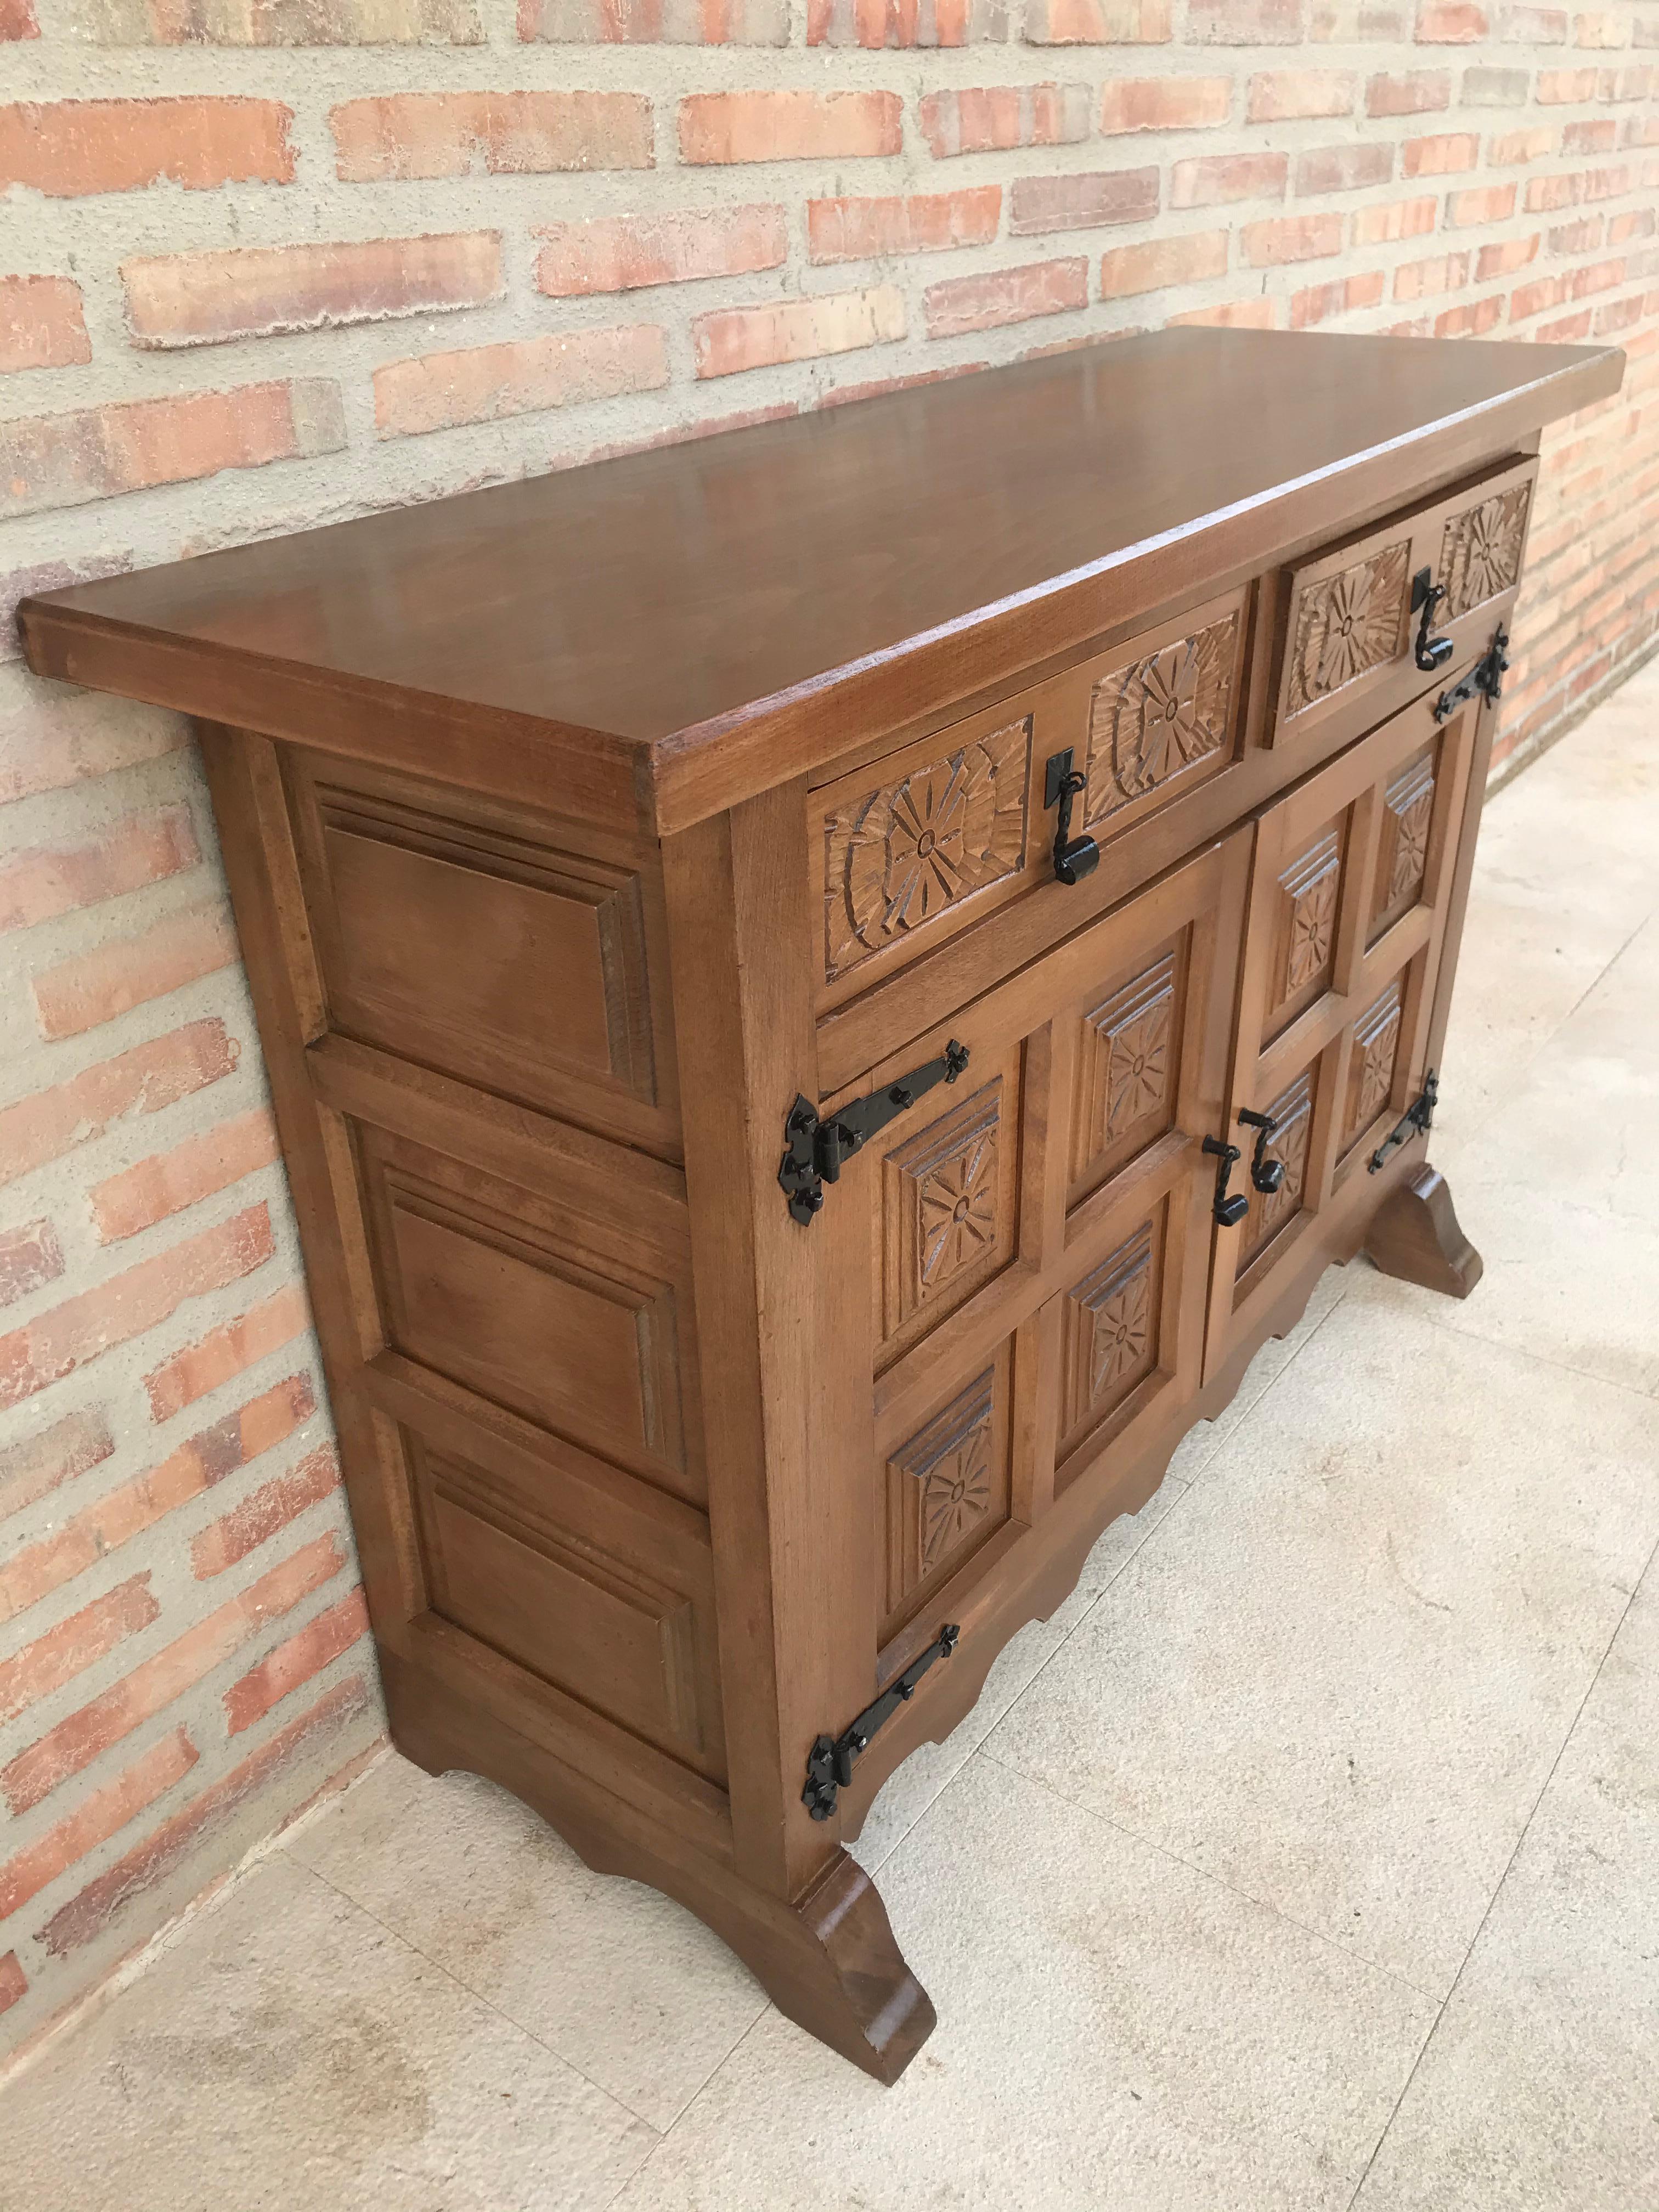 Spanish 20th Century Catalan Baroque Carved Walnut Tuscan Two Drawers Credenza or Buffet